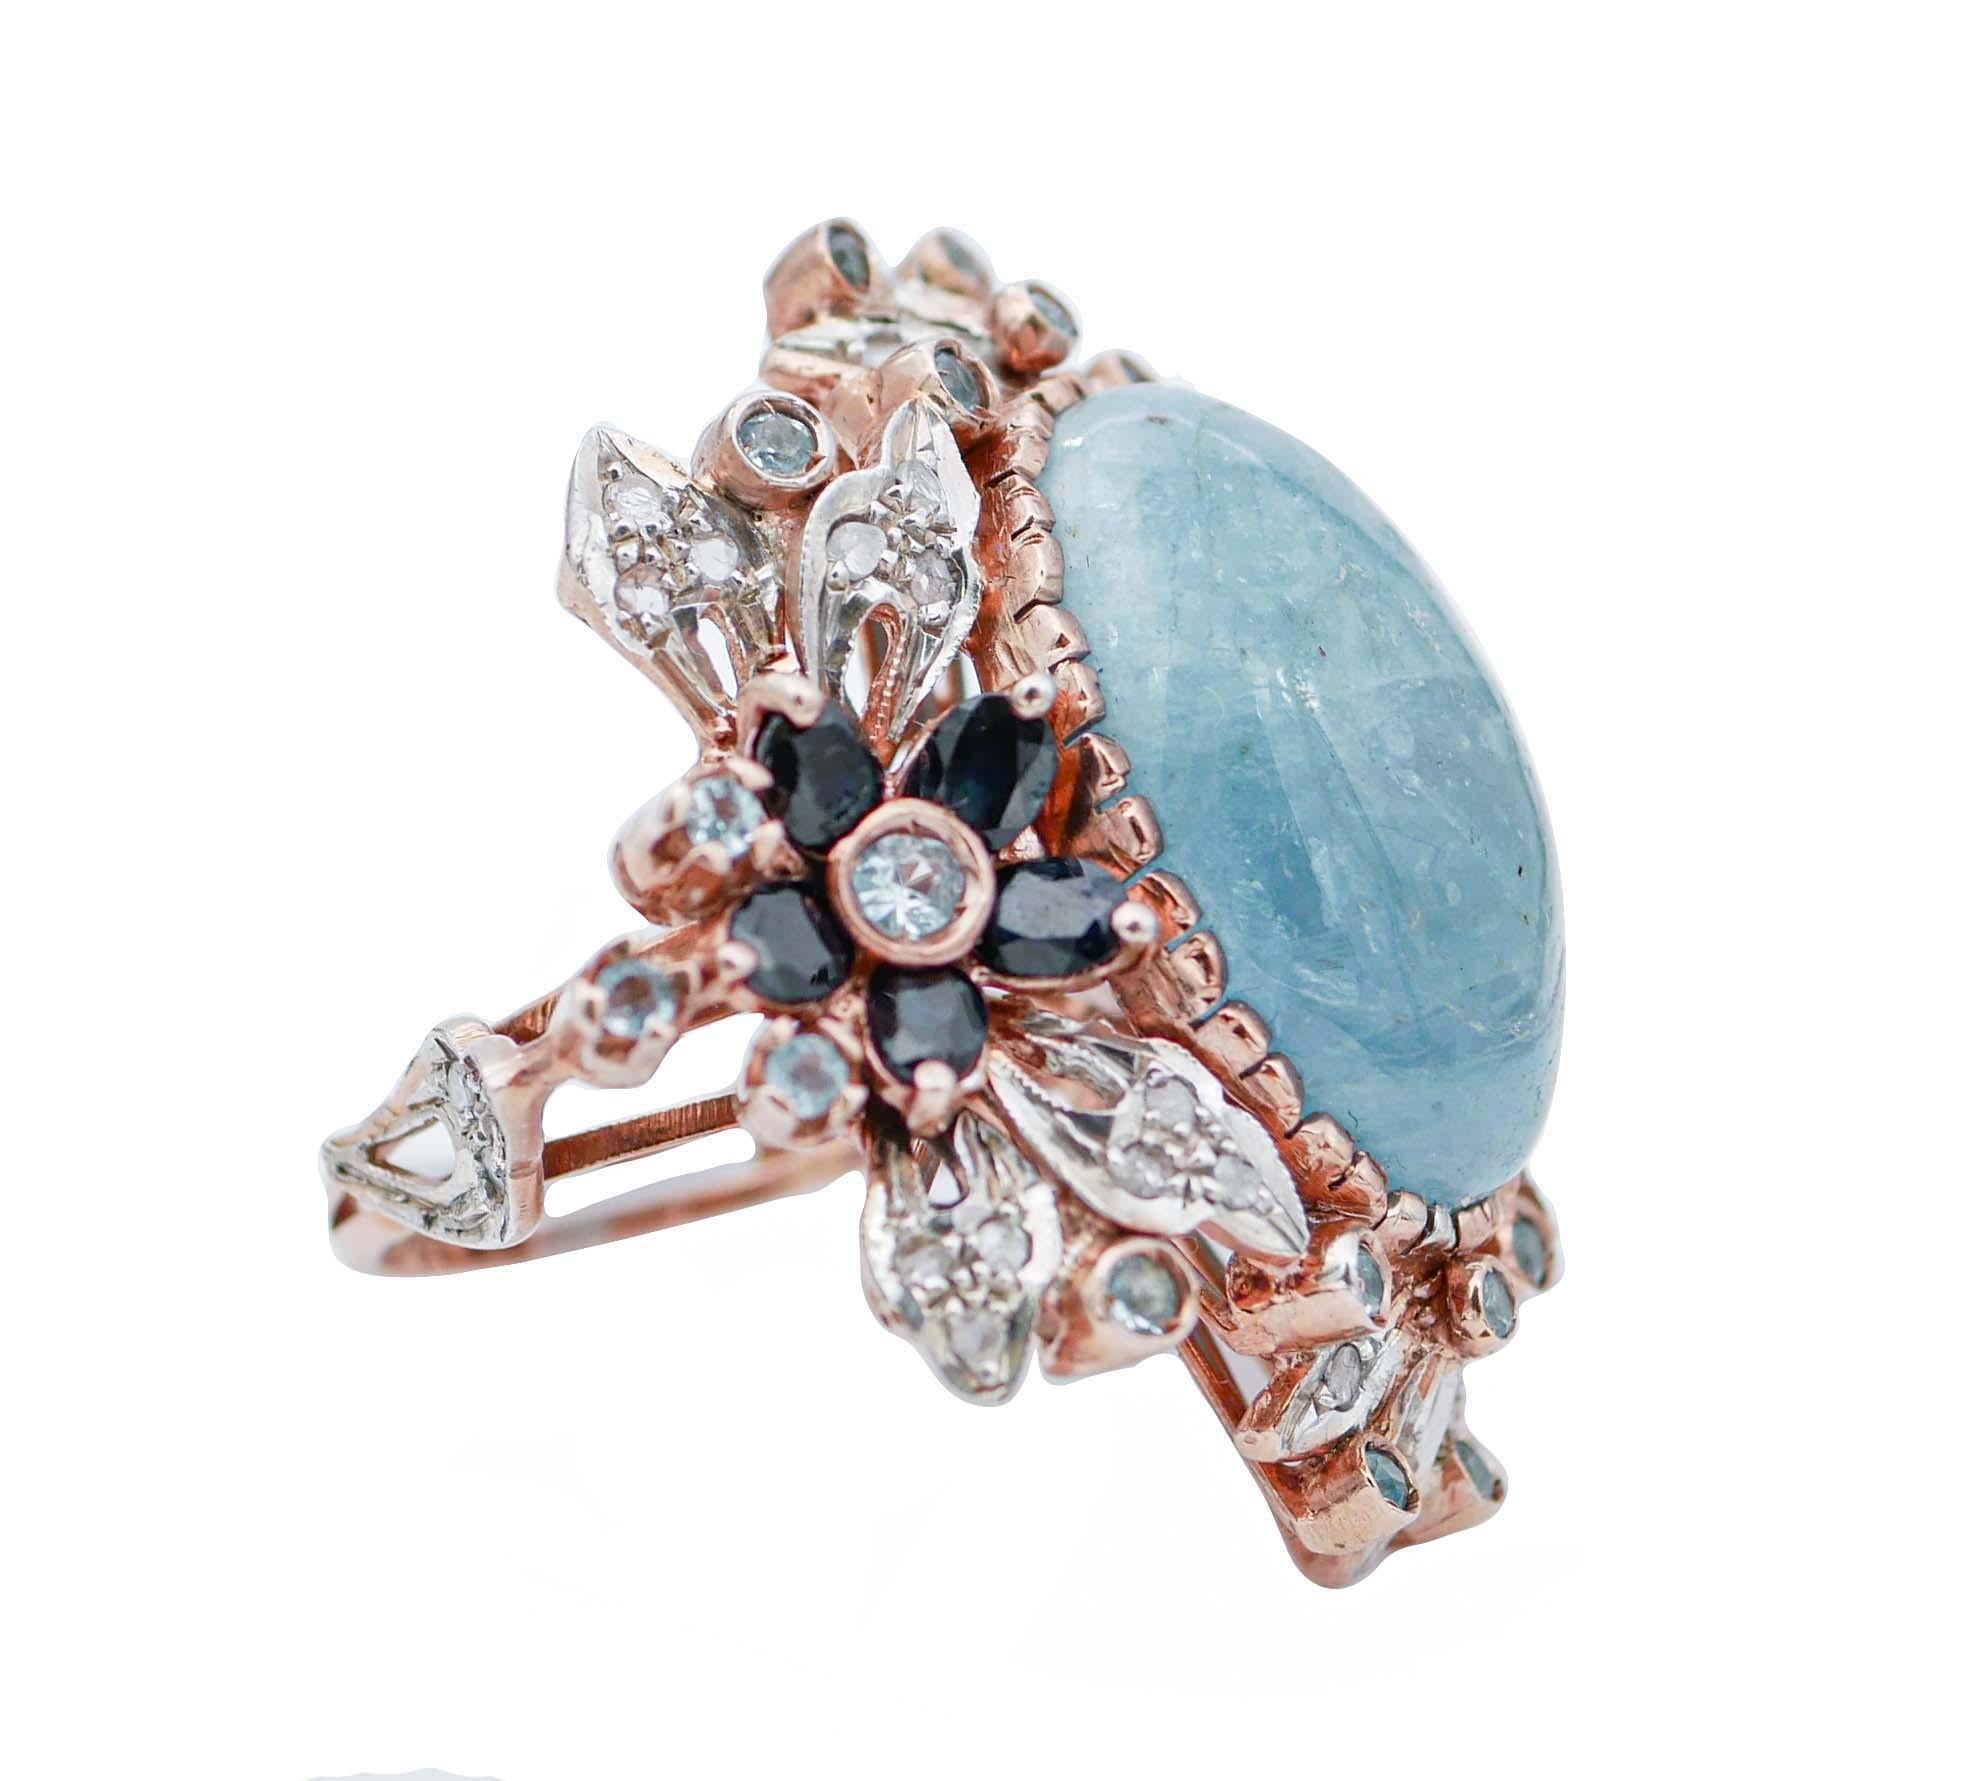 SHIPPING POLICY:
No additional costs will be added to this order.
Shipping costs will be totally covered by the seller (customs duties included).

Amazing retrò ring in 14 kt rose gold and silver structure mounted with a central aquamarine